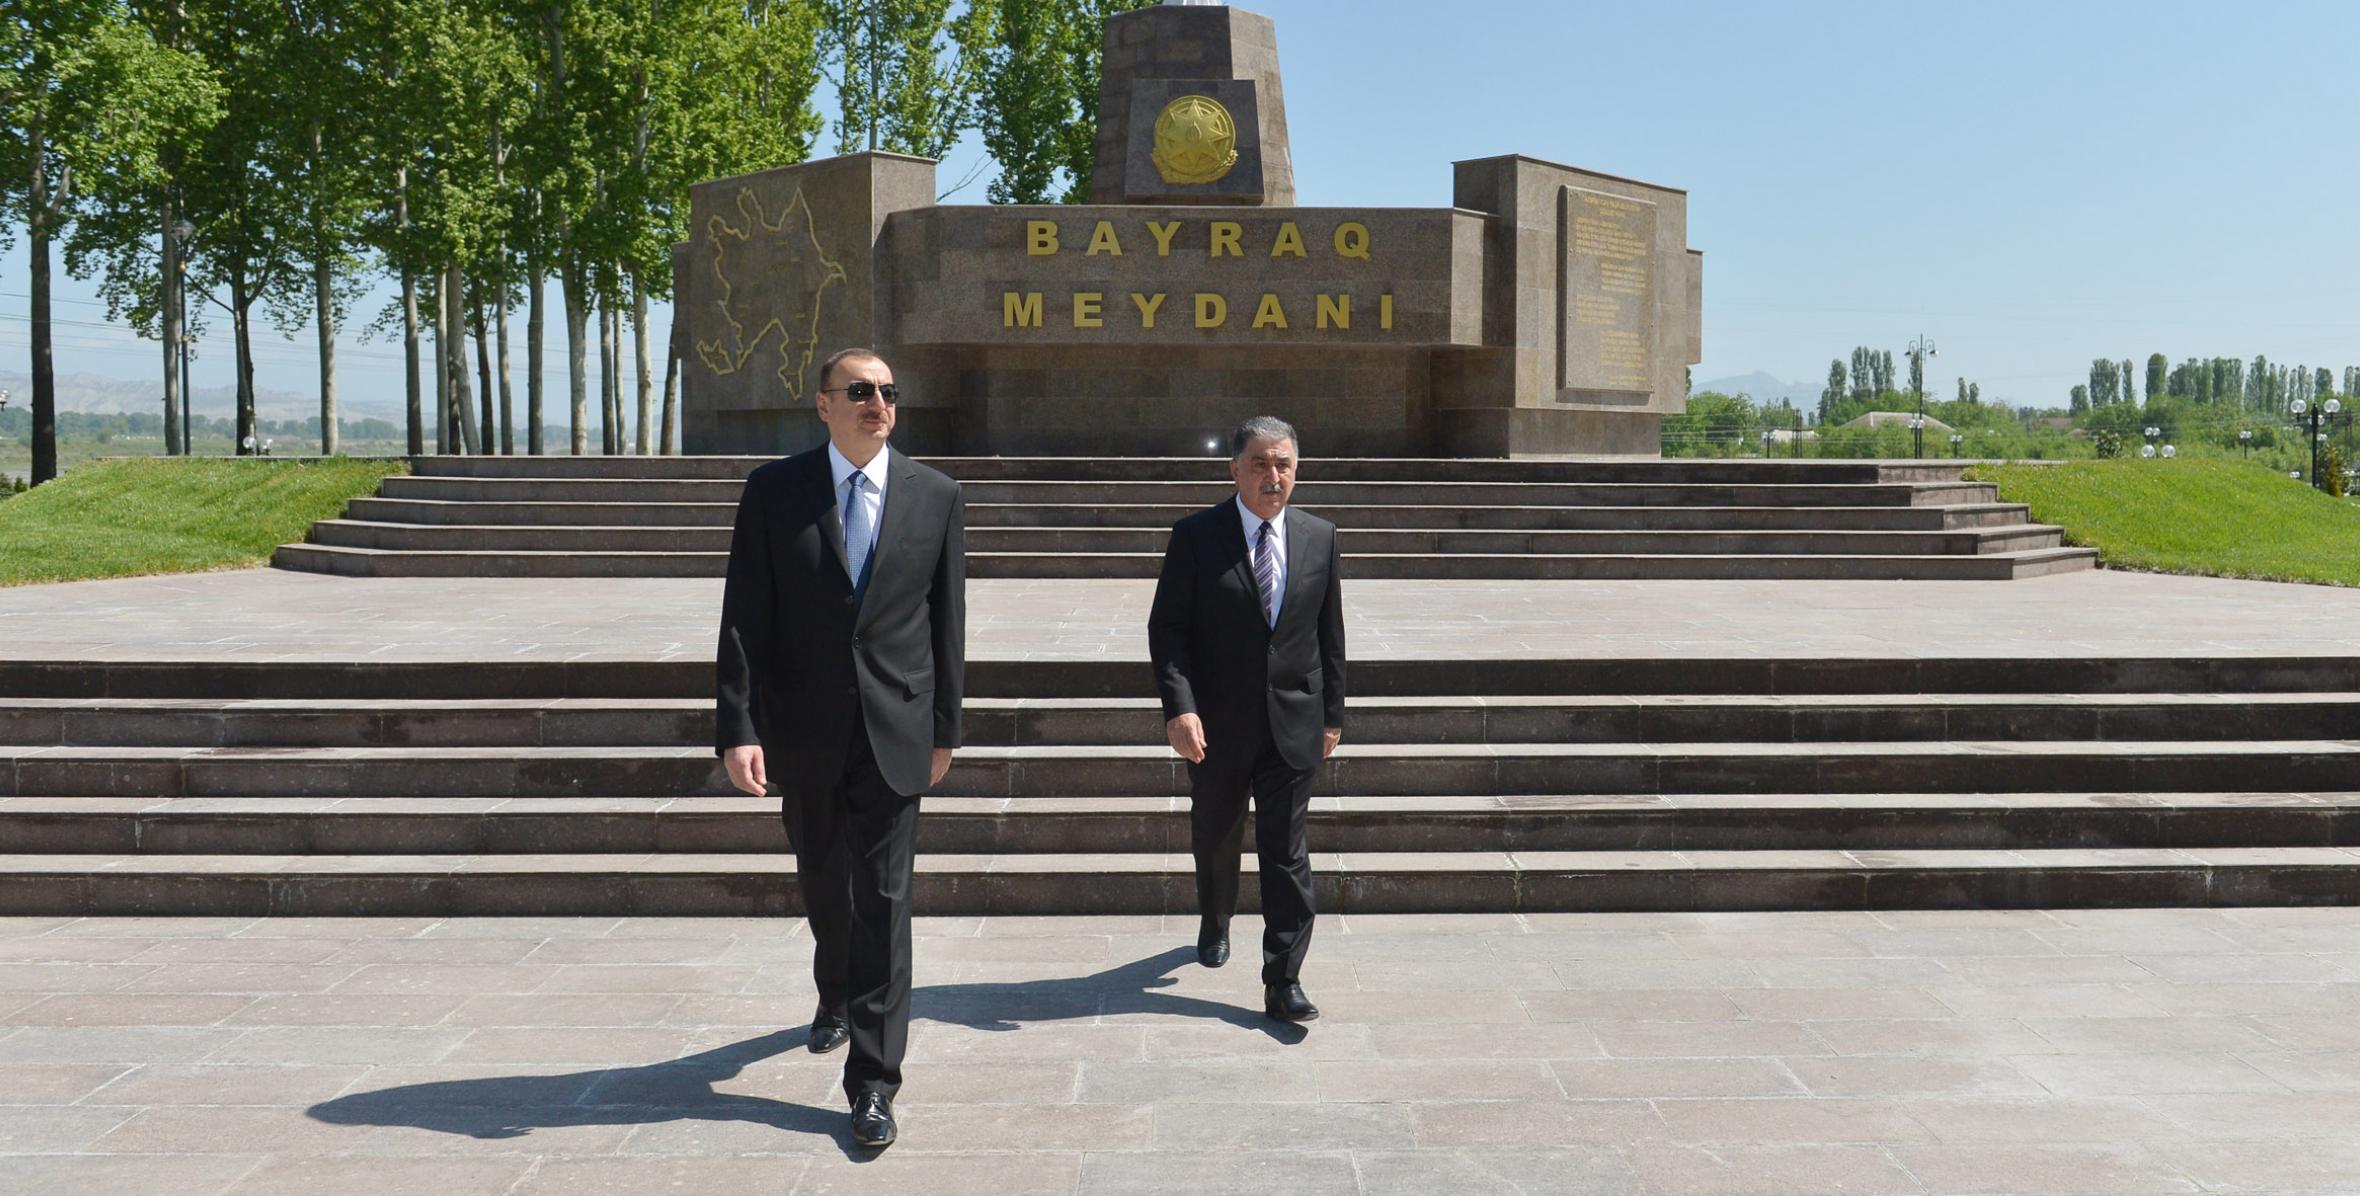 Ilham Aliyev reviewed the Flag Square in Agdash